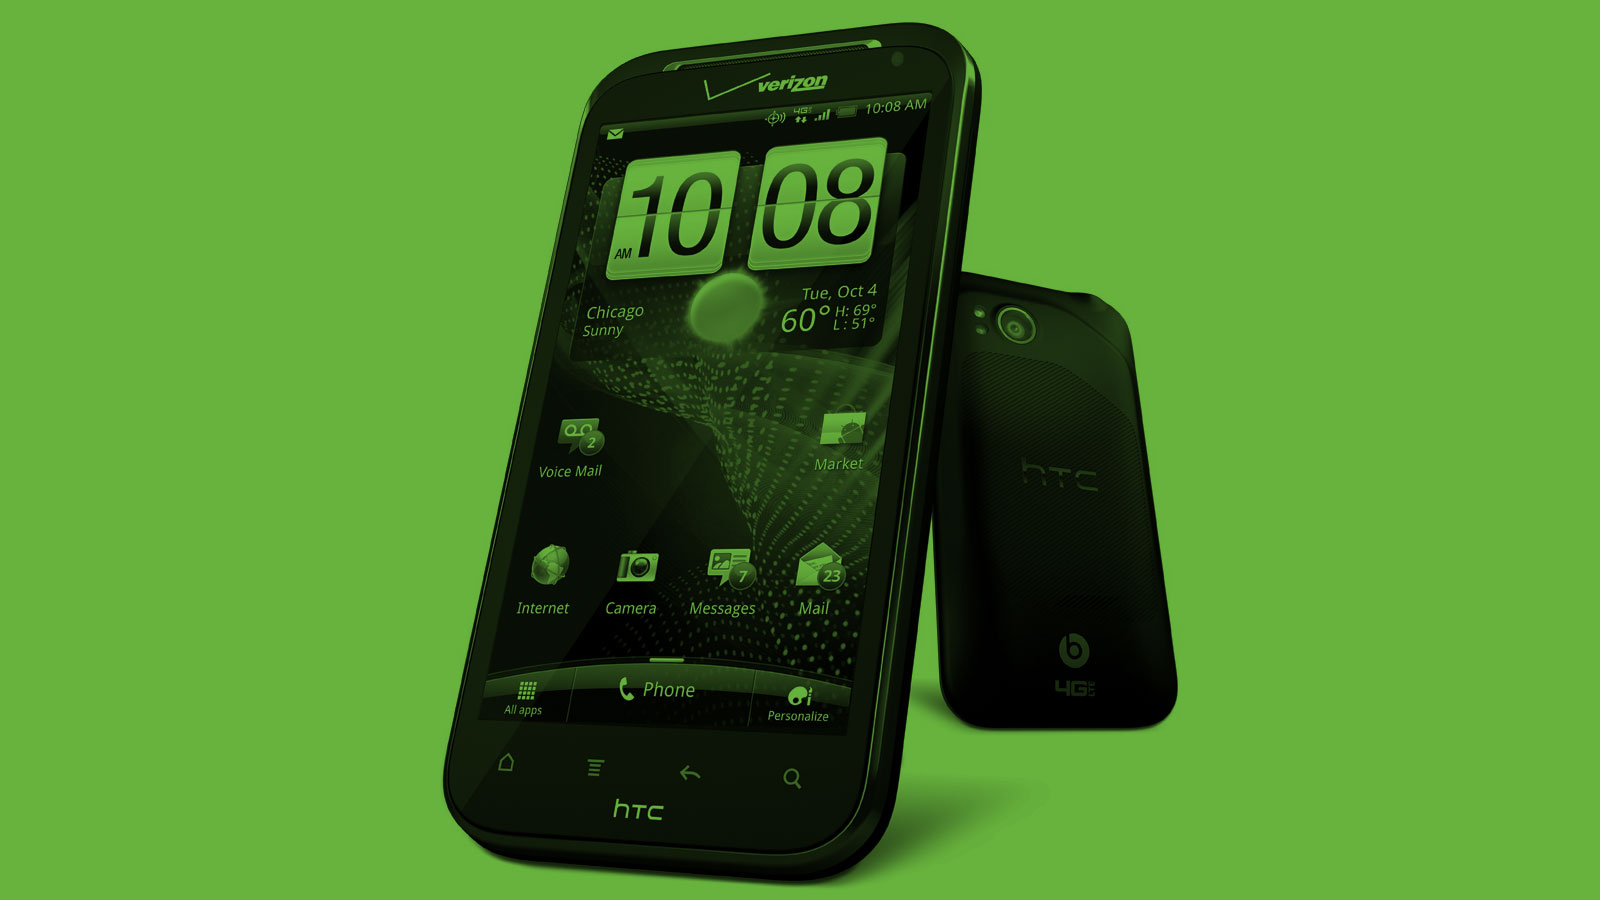   HTC    See Project  